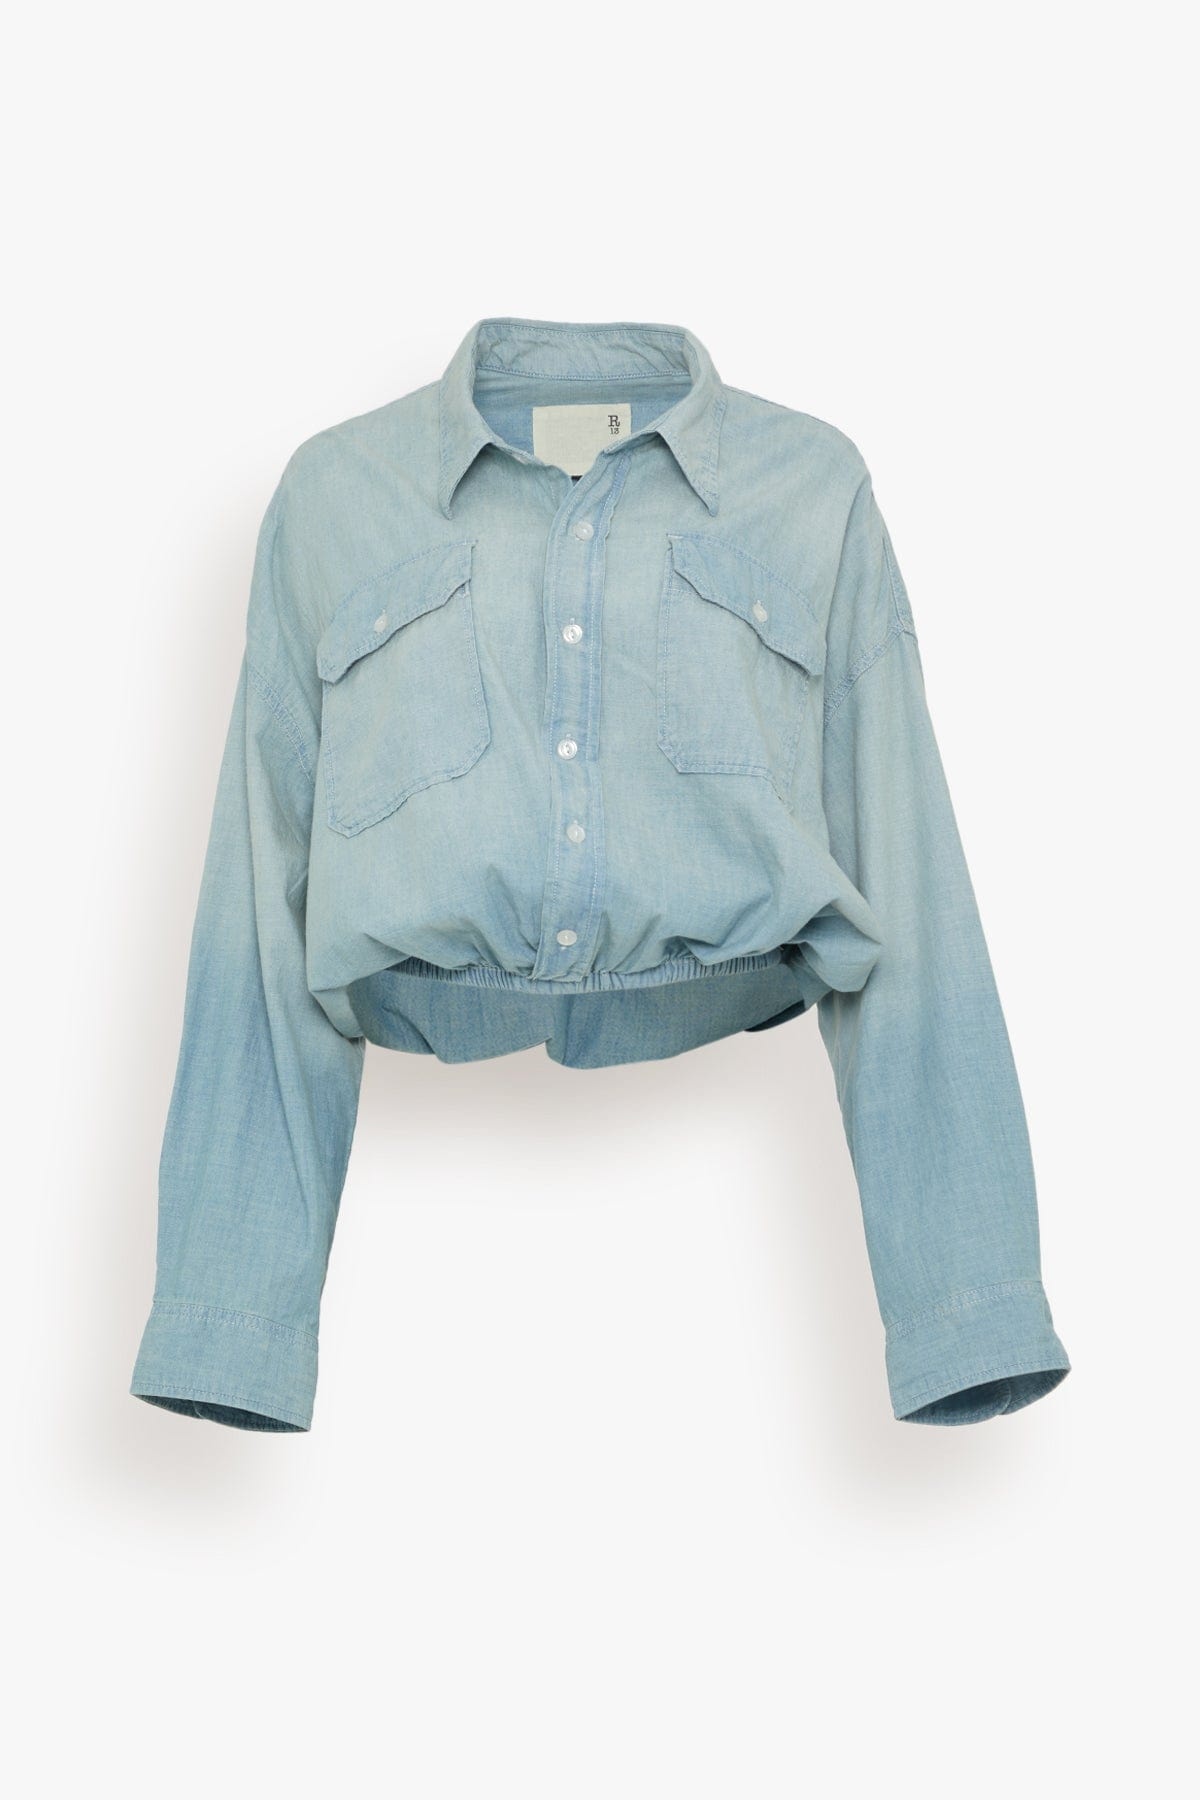 Crossover Utility Bubble Shirt in Vintage Blue Chambray - 1